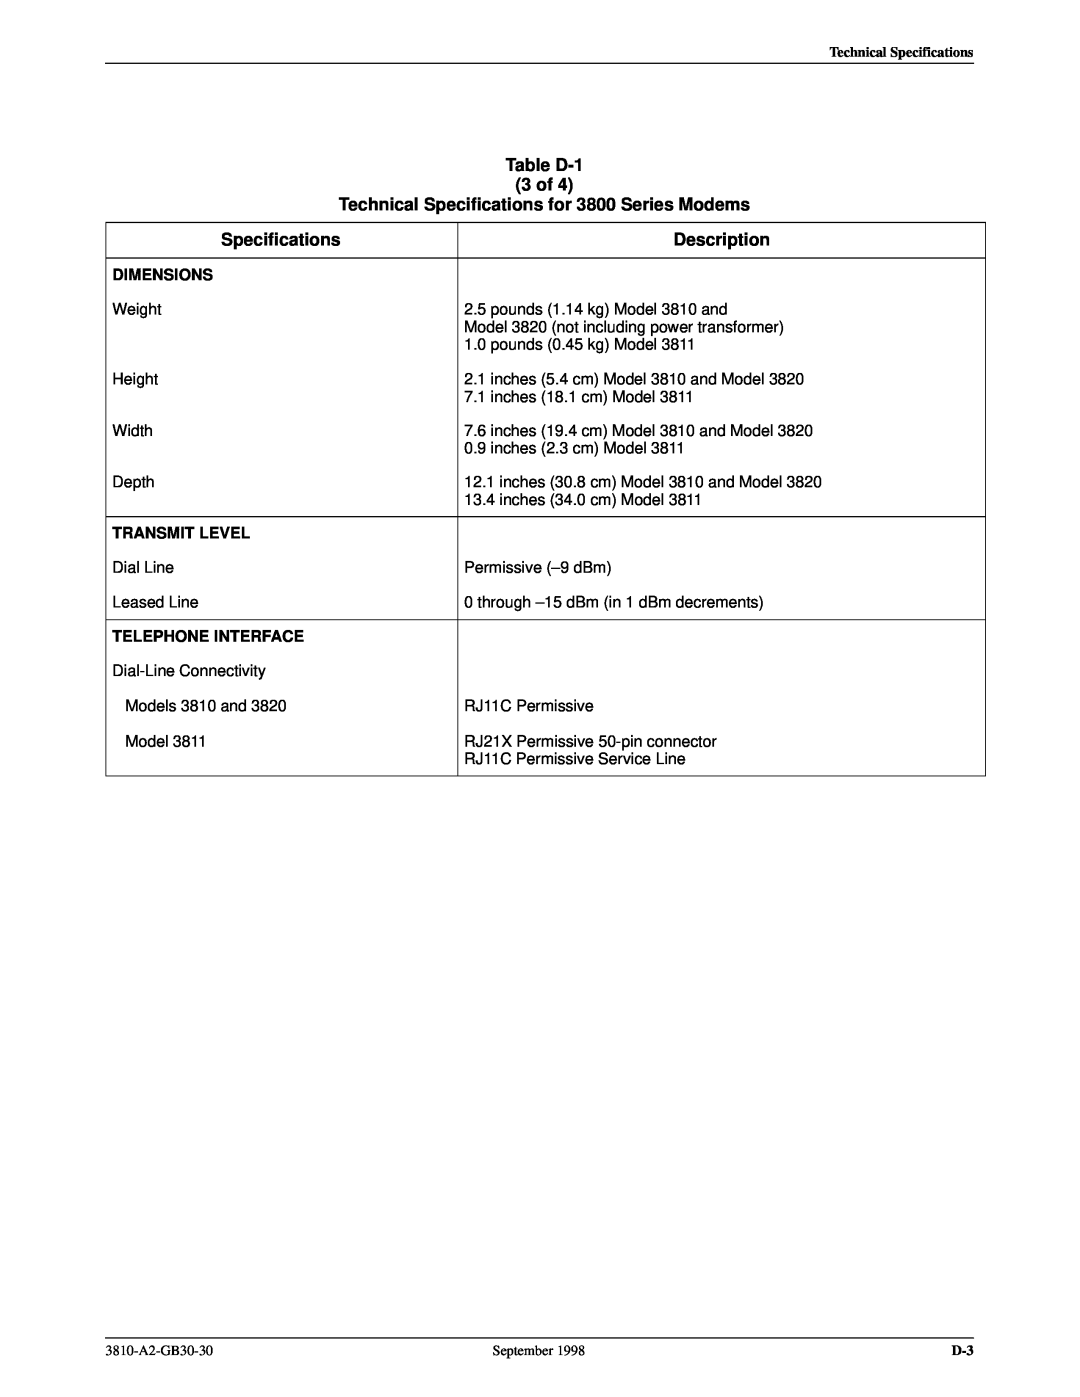 Paradyne manual Table D-1 3 of Technical Specifications for 3800 Series Modems, Description, Dimensions, Transmit Level 